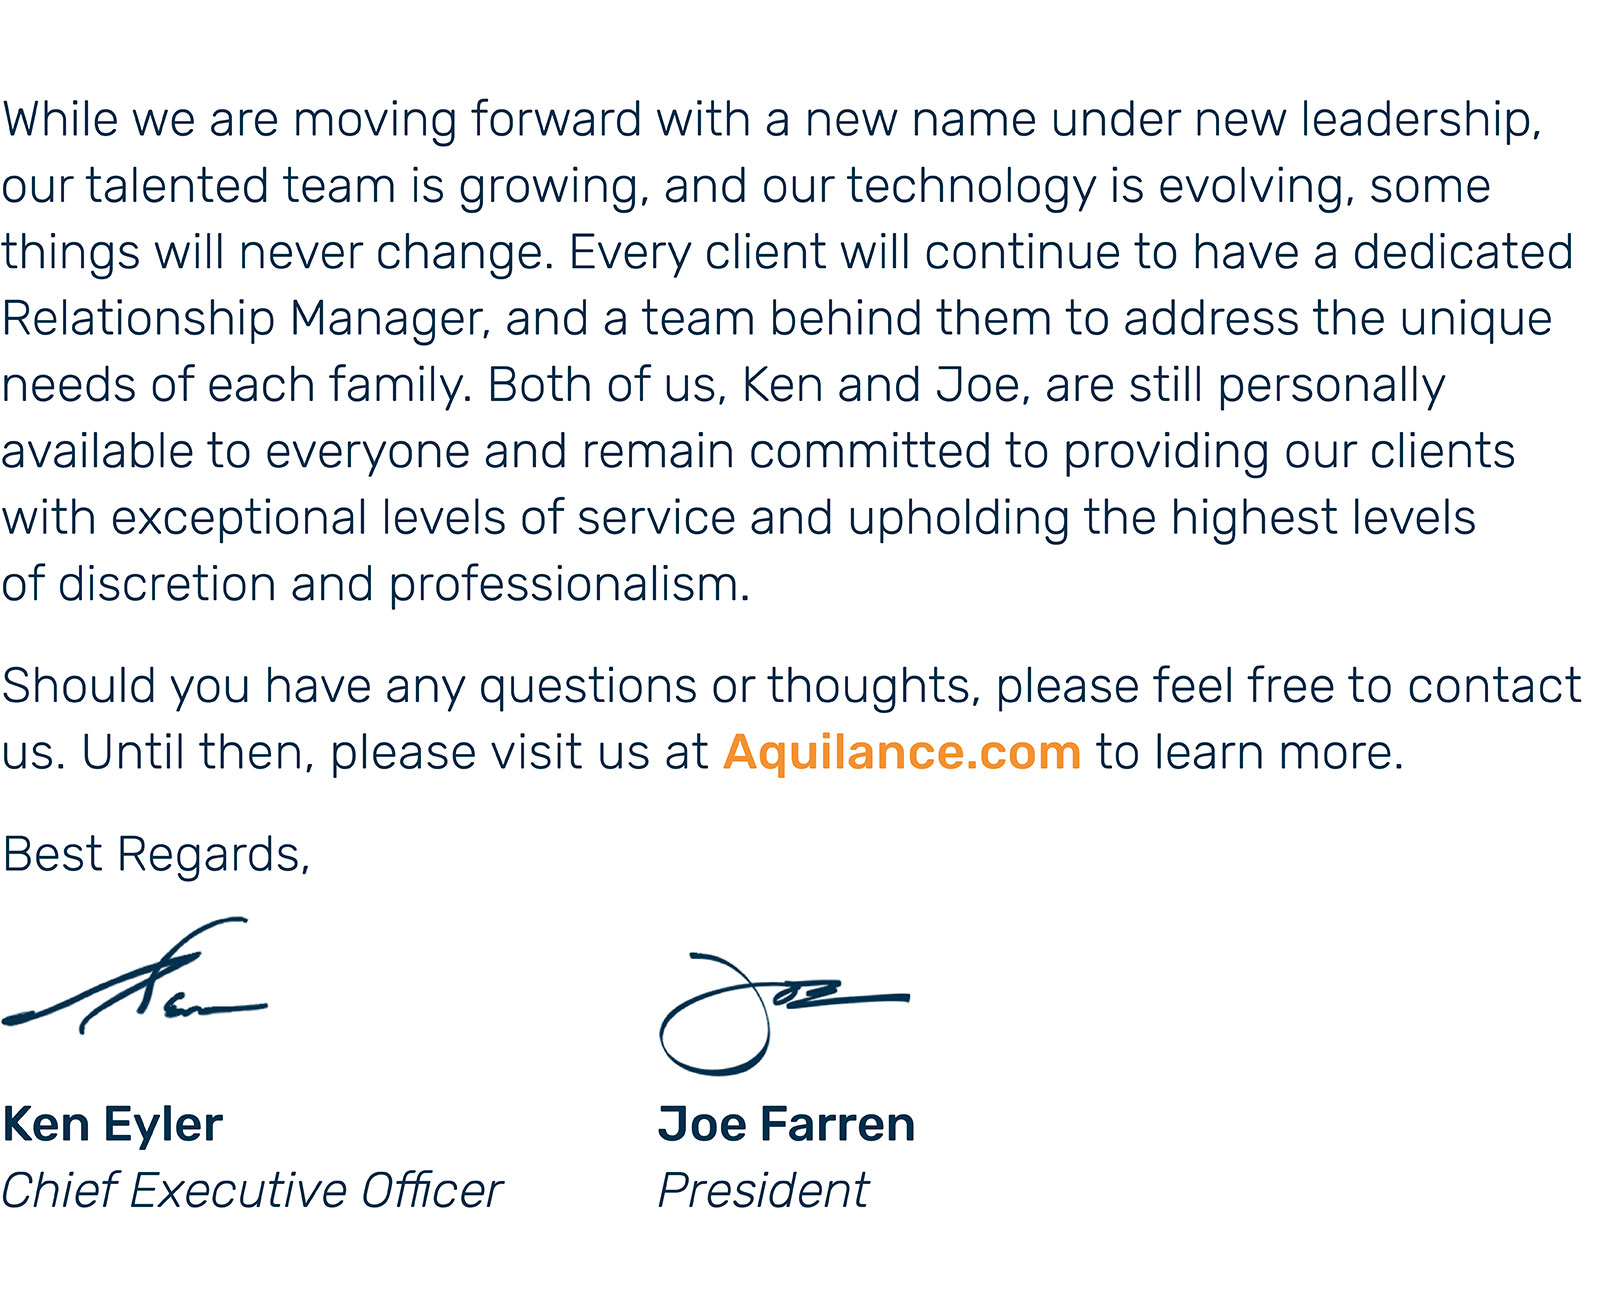 We look forward to speaking with you about the evolution of our business, a note from Ken Eyler and Joe Farren of Aquilance